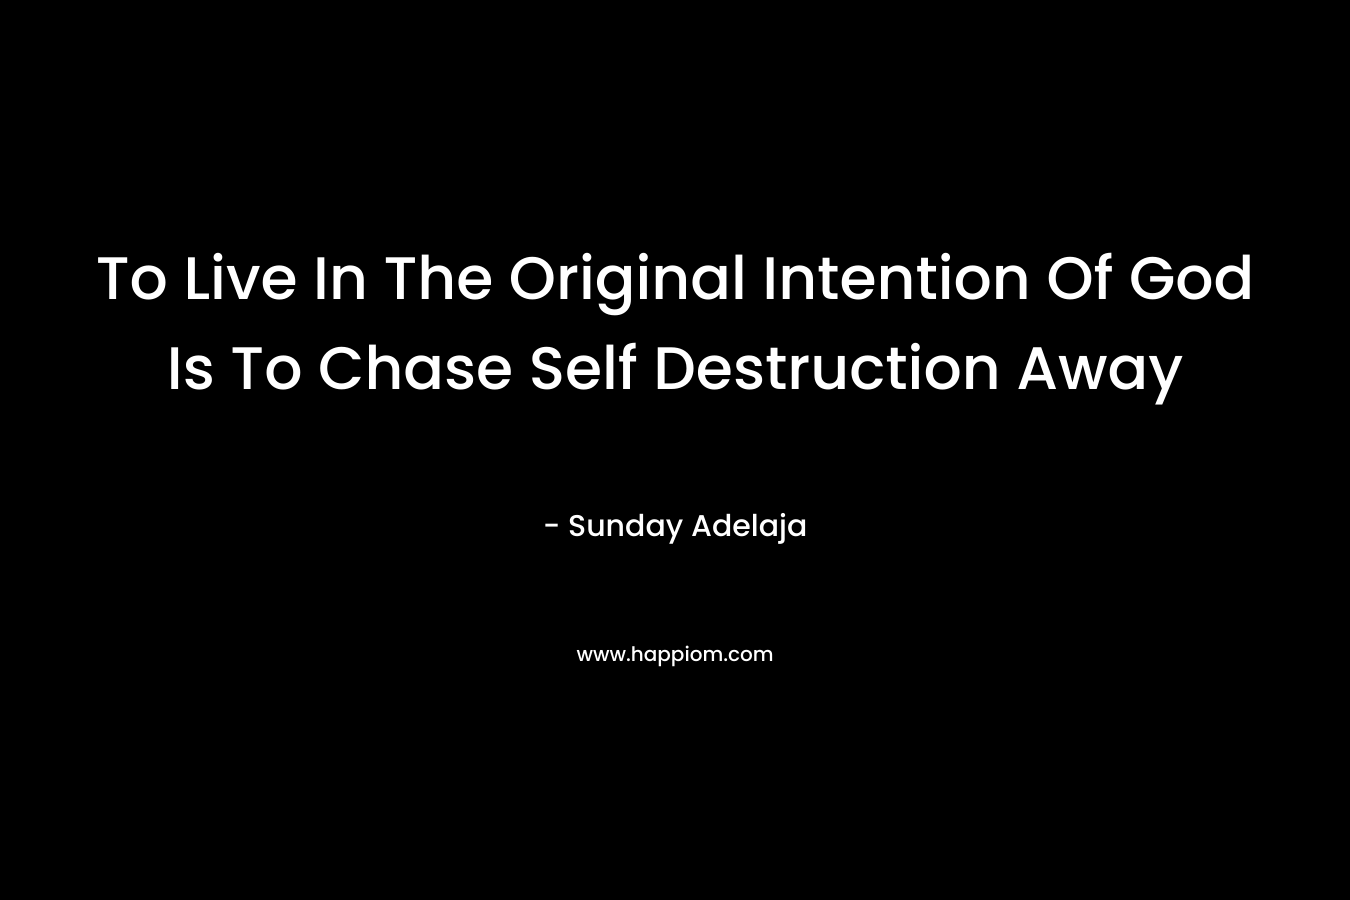 To Live In The Original Intention Of God Is To Chase Self Destruction Away